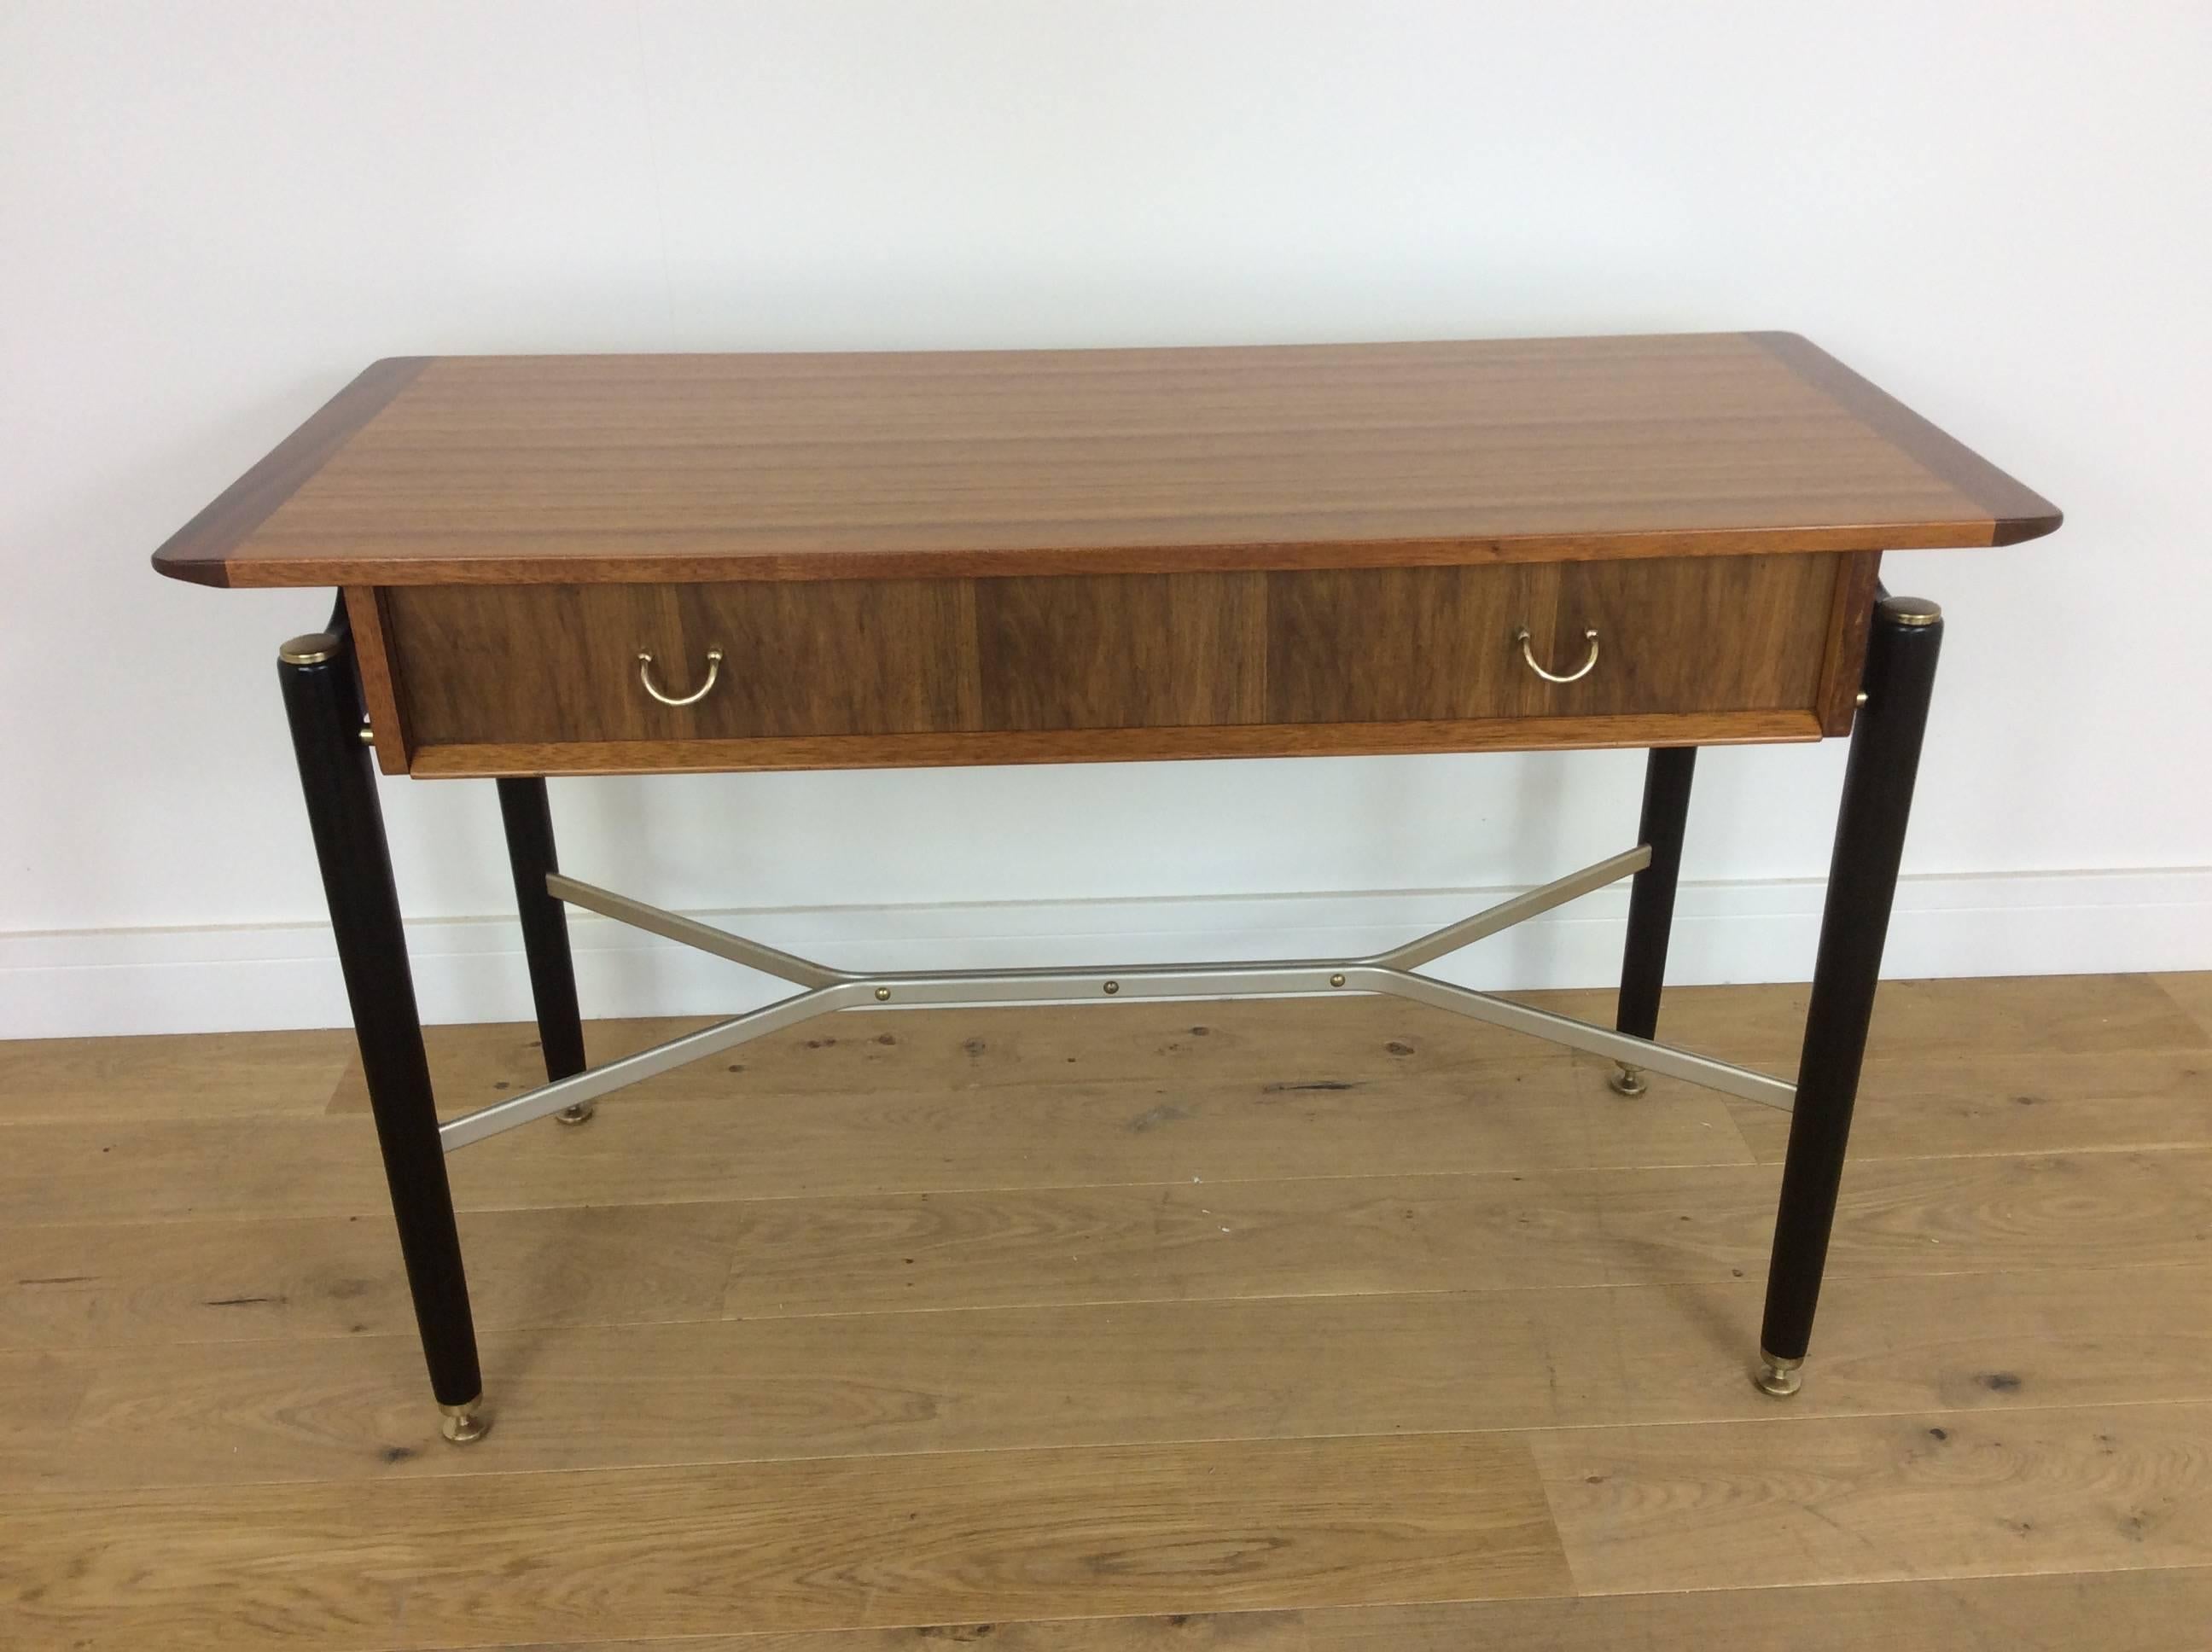 Mid-Century Modern design from the UK
A rare console table or desk beautifully presented in teak wood and ebony with polished brass fixtures, height adjustable feet, polished aluminium stretcher.
Designed by E Gomme for G Plan
British, circa